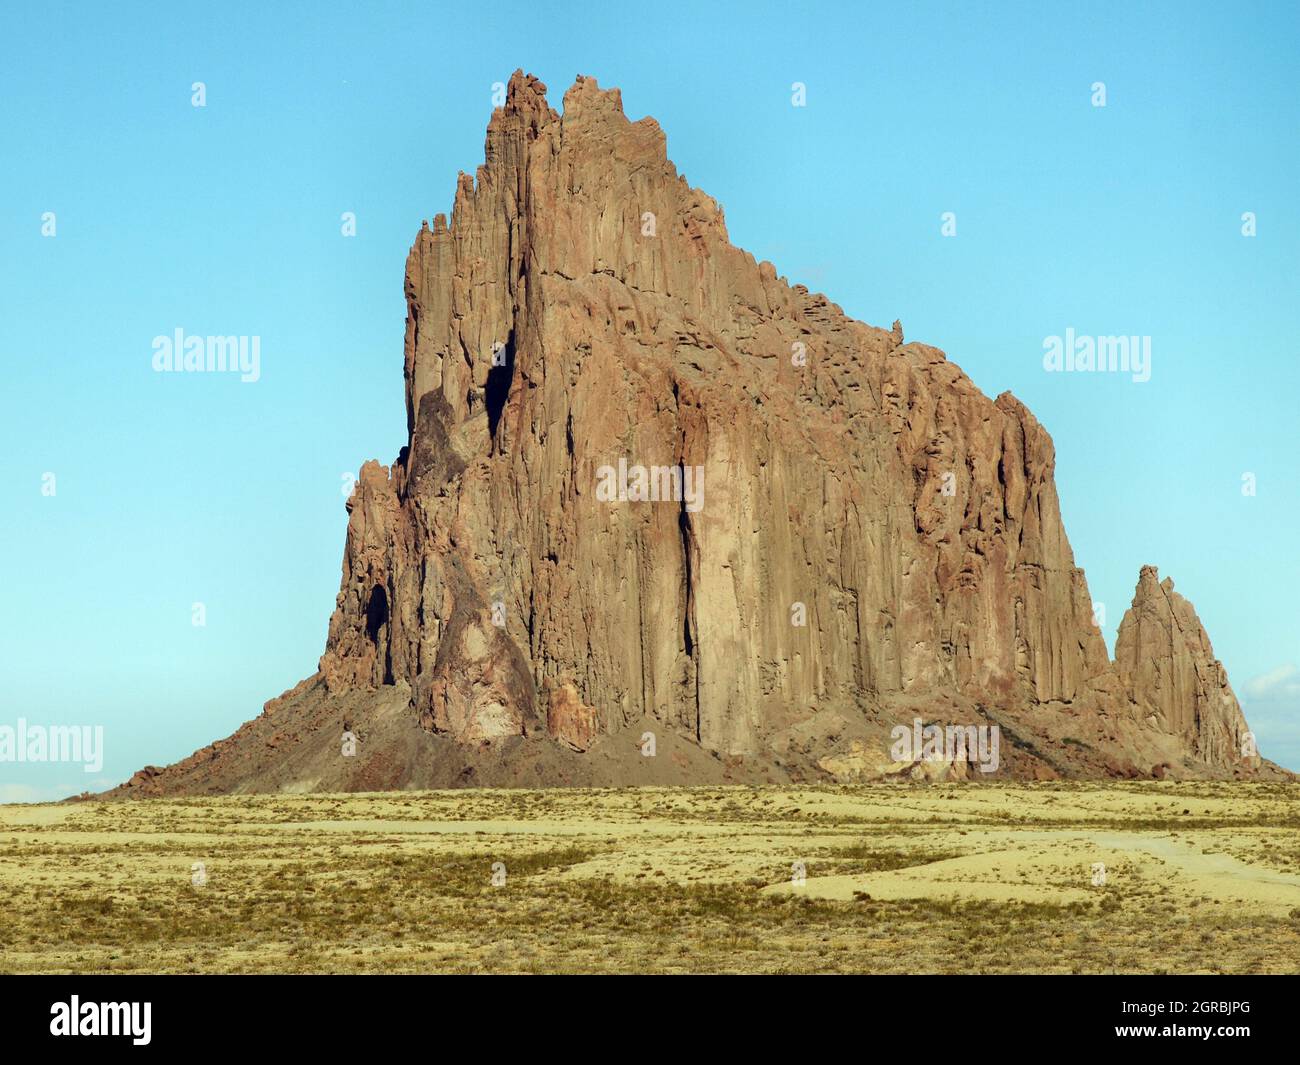 Mountain Rock Desert Sky Is Bleu This Is The Ancient History In The Valley Western In Usa Stock Photo